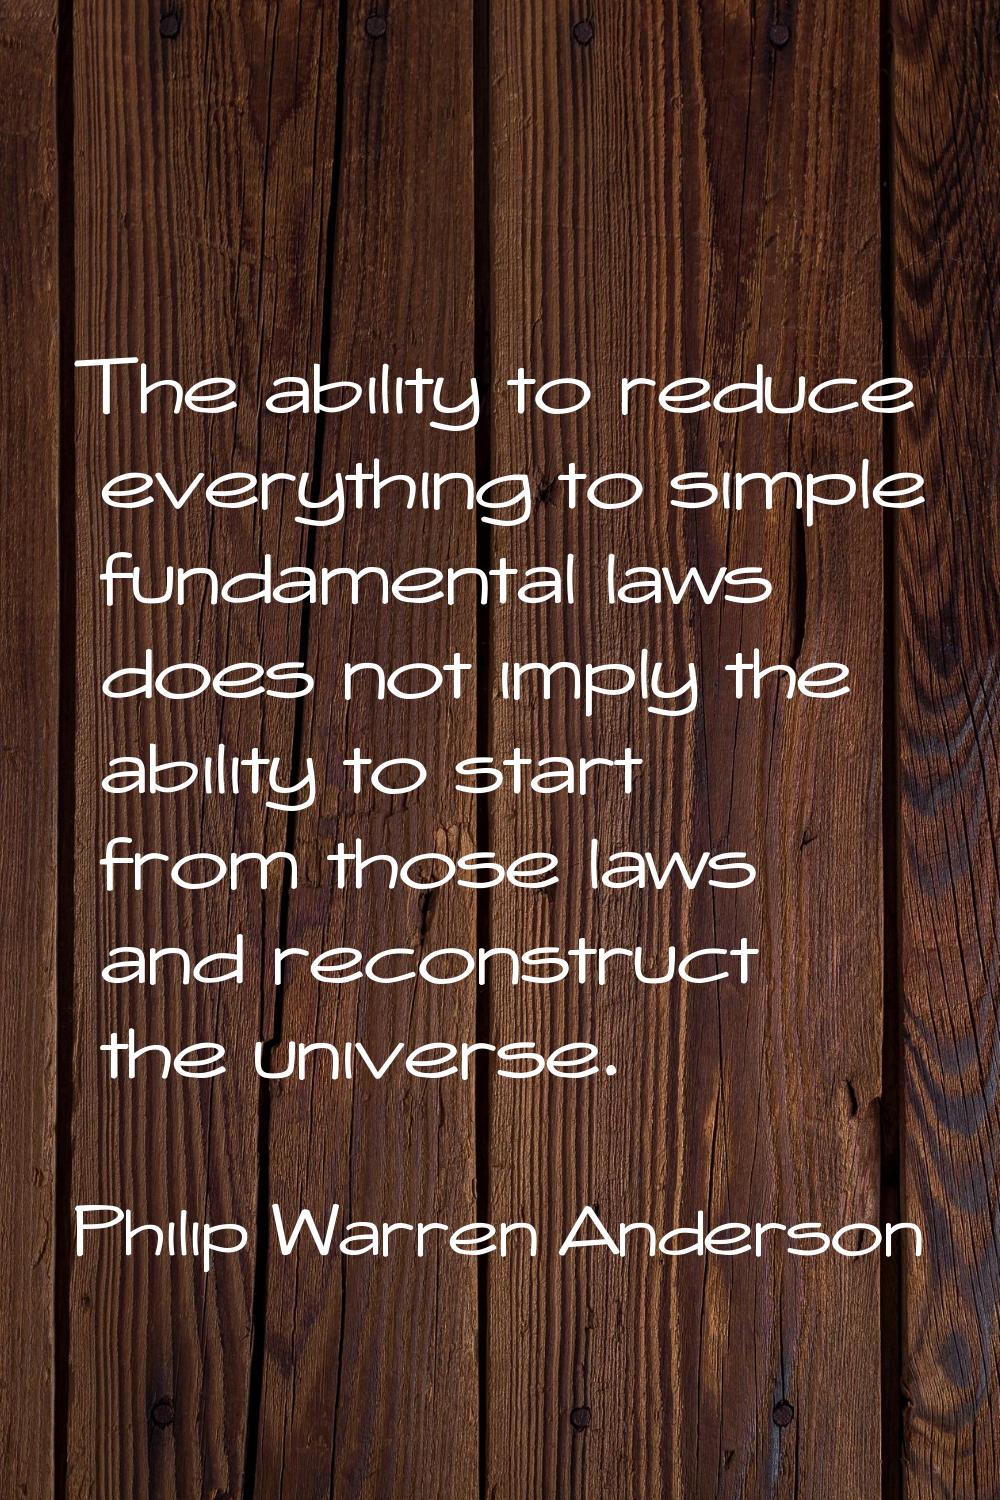 The ability to reduce everything to simple fundamental laws does not imply the ability to start fro